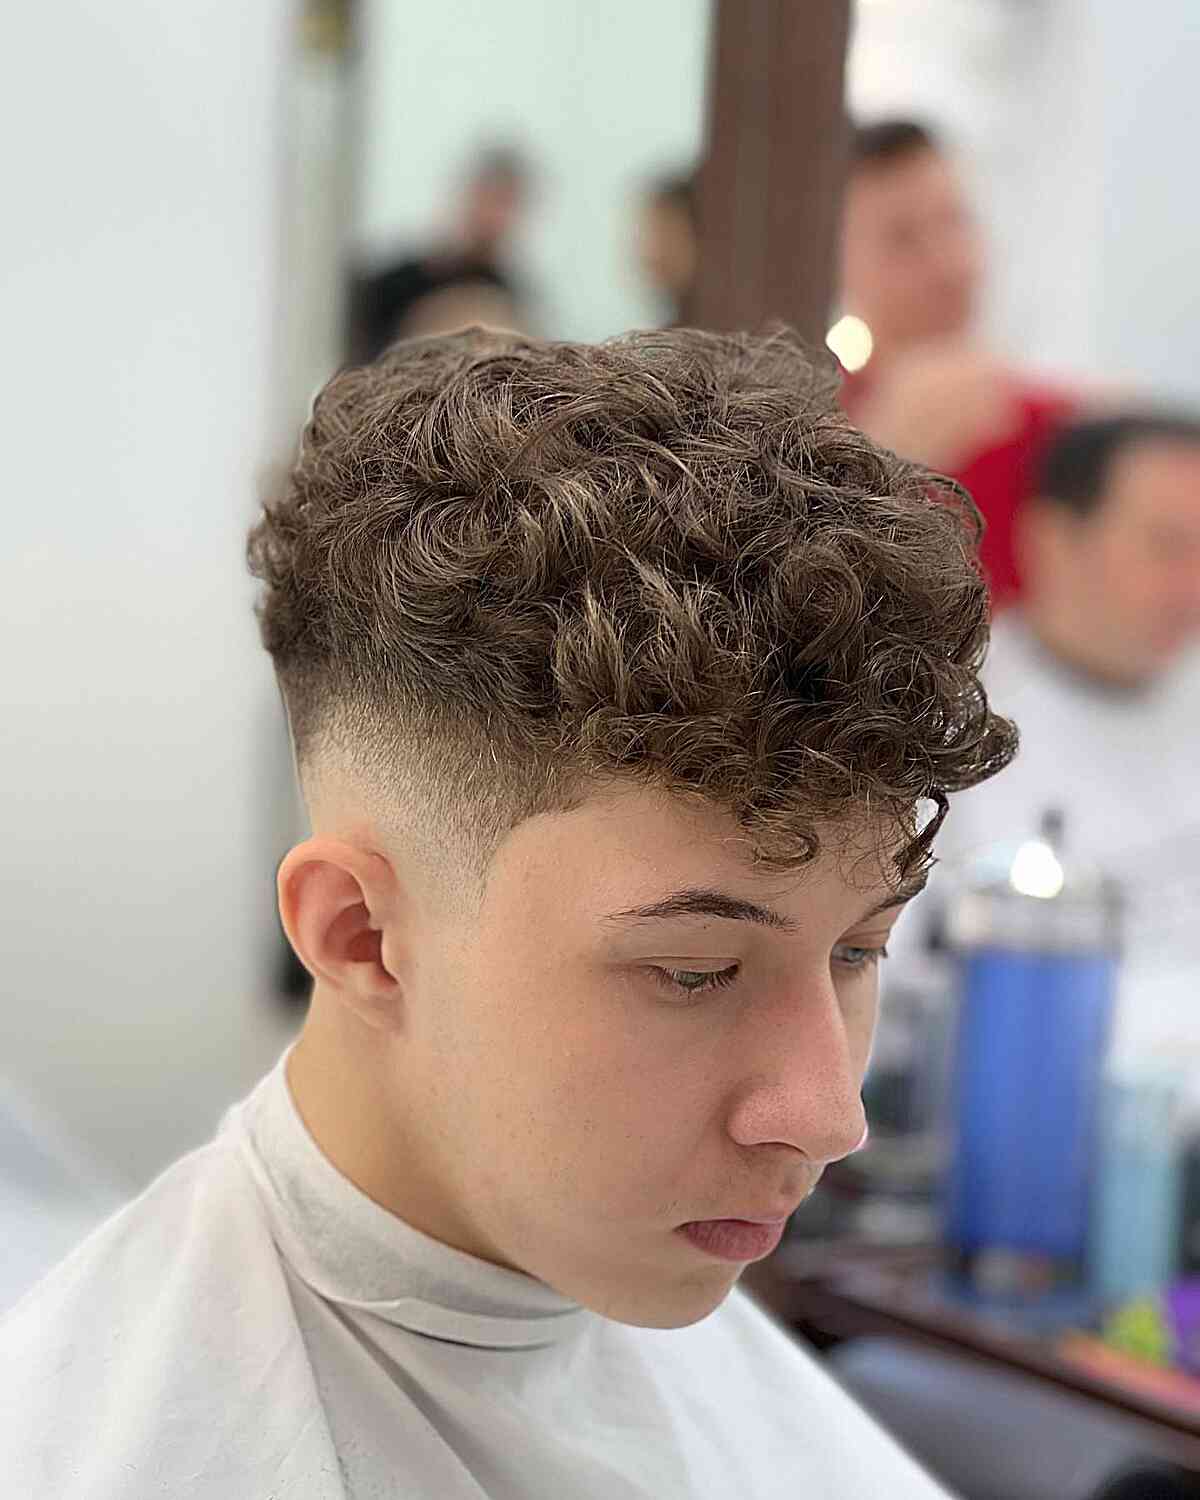 Curly Top with Curly Bangs for Teen Boys with a skin fade